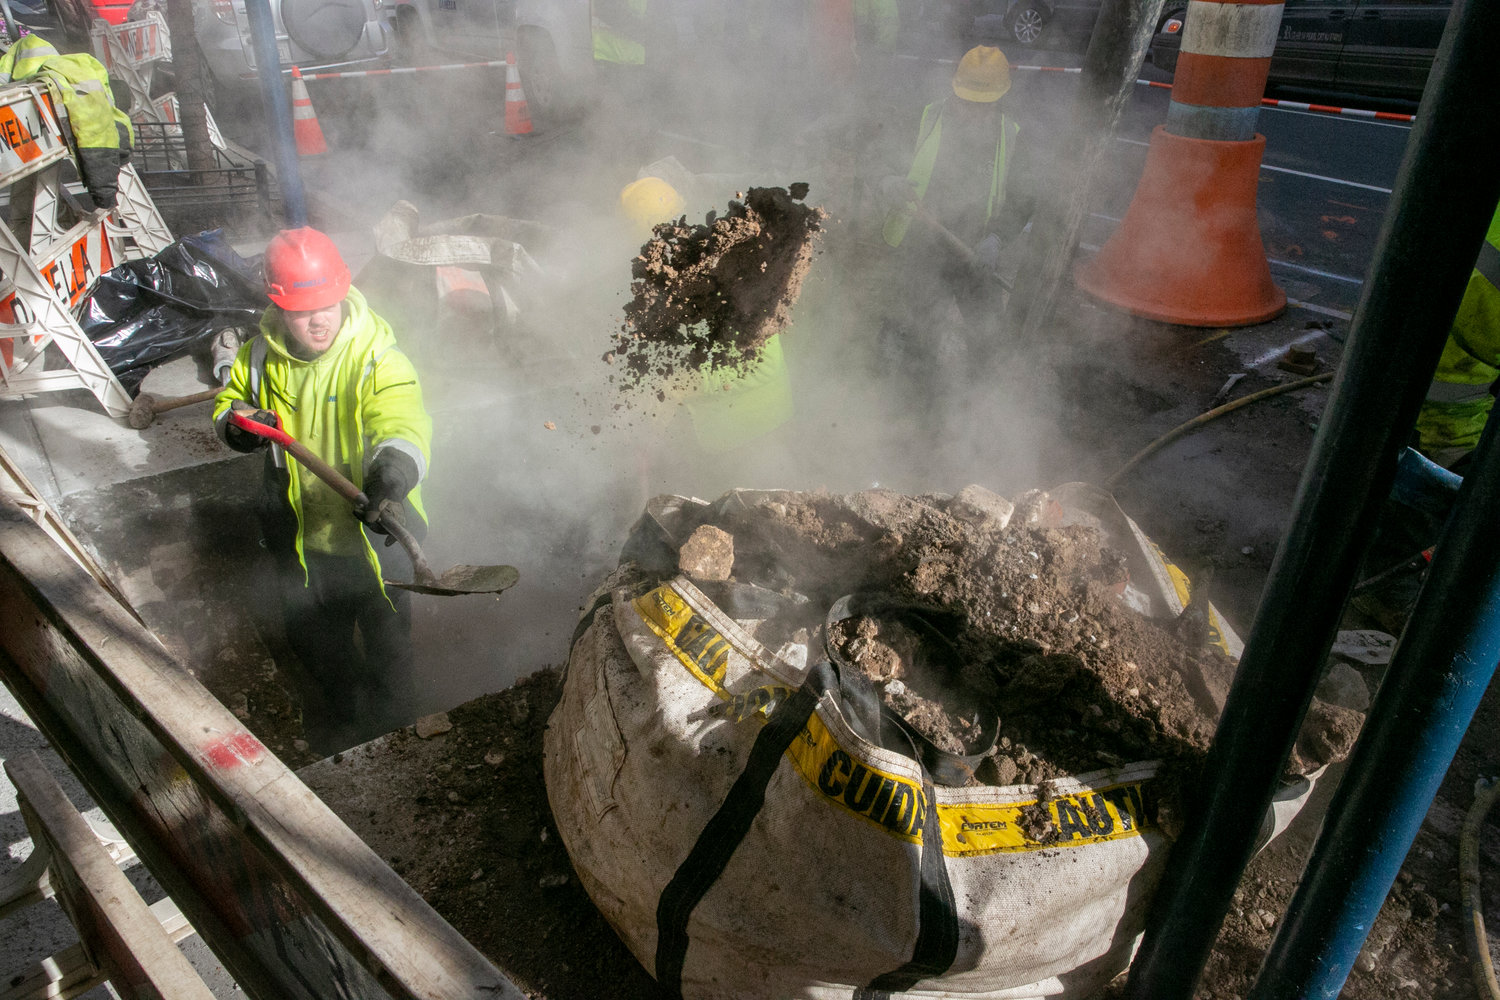 A worker shoveled dirt from under the street pavement while repairing a steam pipe in Manhattan in January. State lawmakers last week passed Carlos’ Law, which would raise the minimum fines for companies found criminally liable in the death or injury of a construction worker to $500,000. The bill is named for 22-year-old Carlos Moncayo, who was killed in a construction accident in 2015.